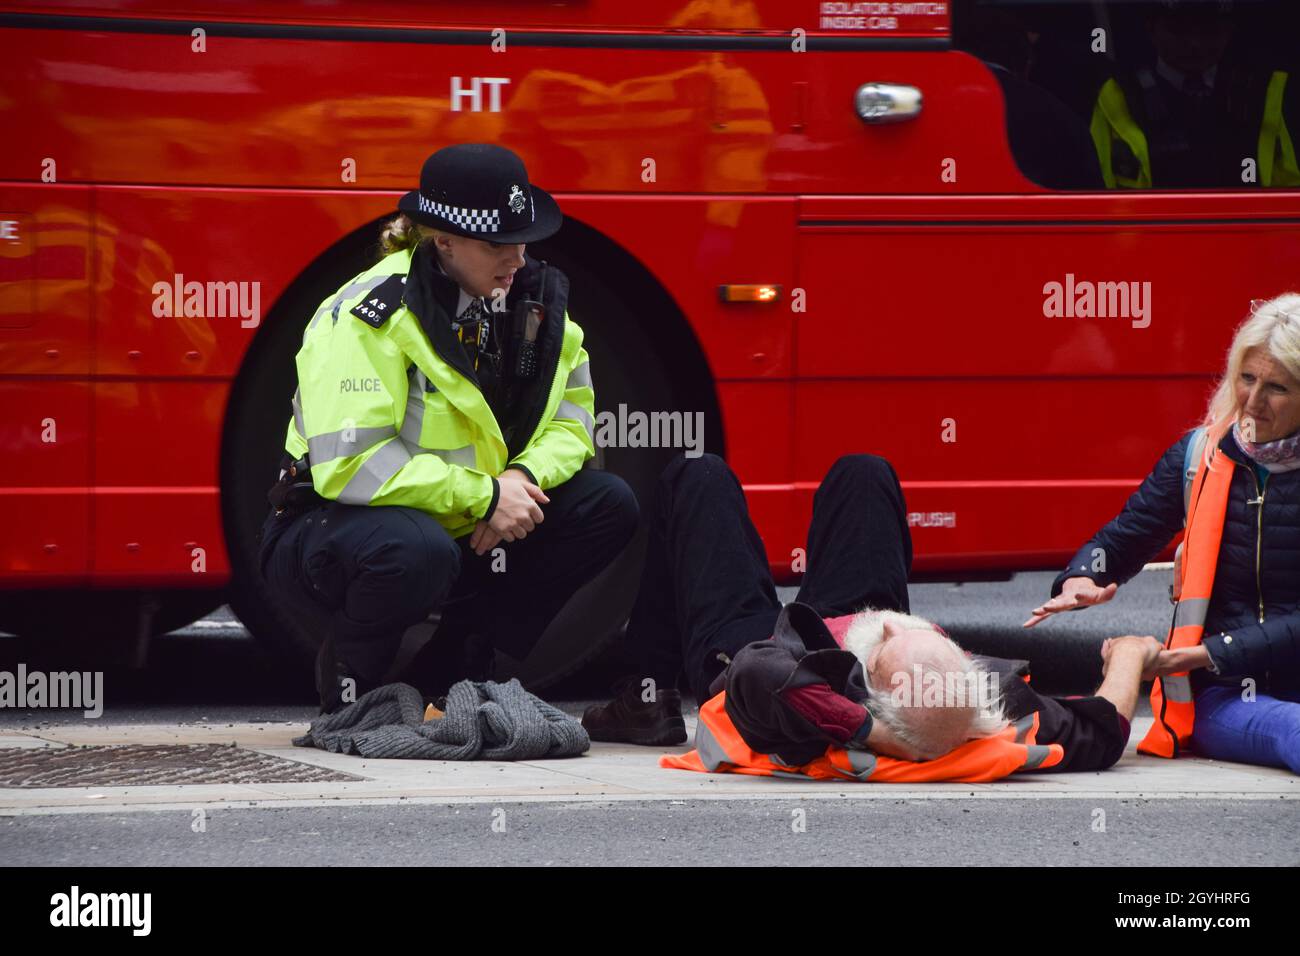 London, United Kingdom. 8th October 2021. Police remove and arrest Insulate Britain protesters who glued themselves to the road at the Old Street roundabout. Insulate Britain protesters are demanding that the government insulates all social housing by 2025, and takes responsibility for ensuring that all homes in the UK are more energy-efficient by 2030, as part of wider climate change and decarbonization targets. Credit: Vuk Valcic / Alamy Live News Stock Photo